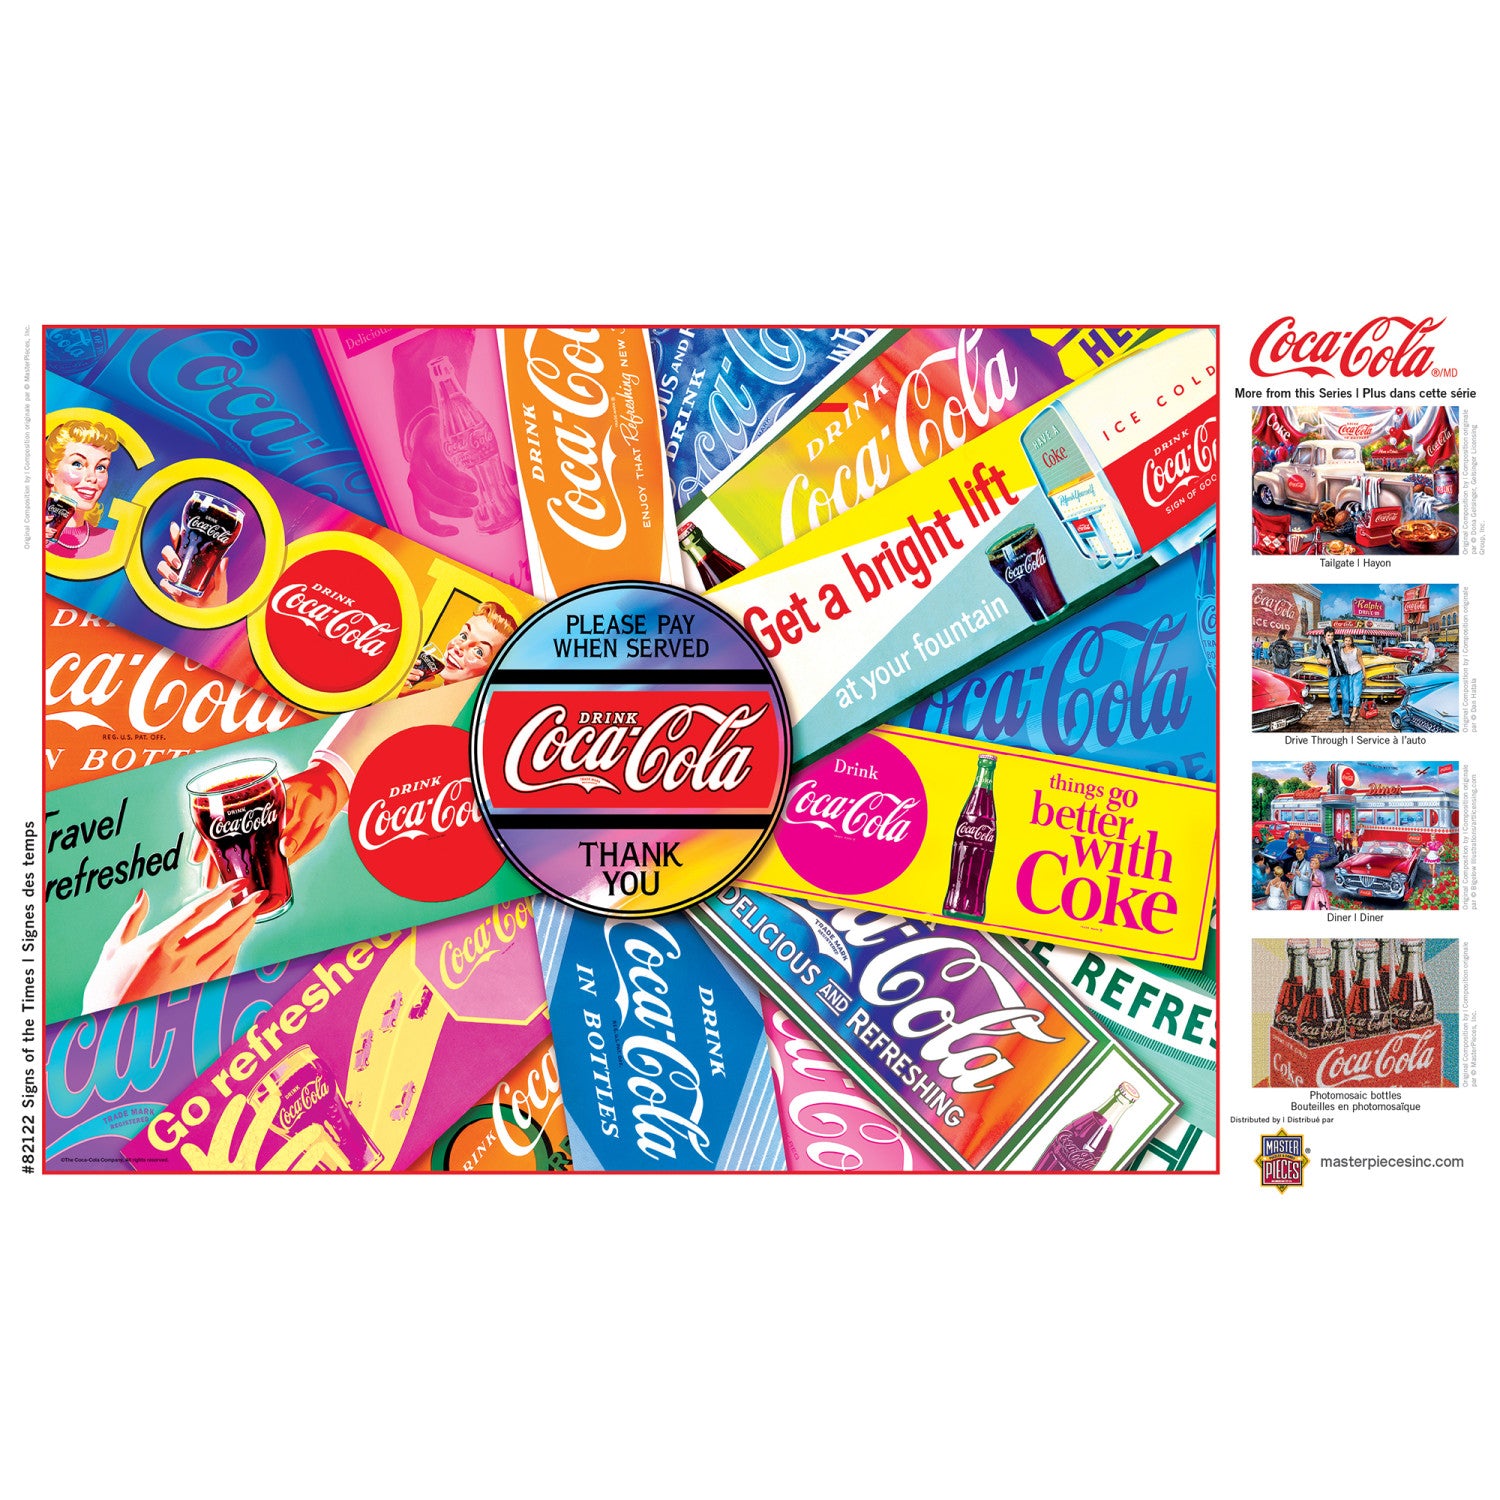 Coca-Cola - Signs of the Times 1000 Piece Puzzle